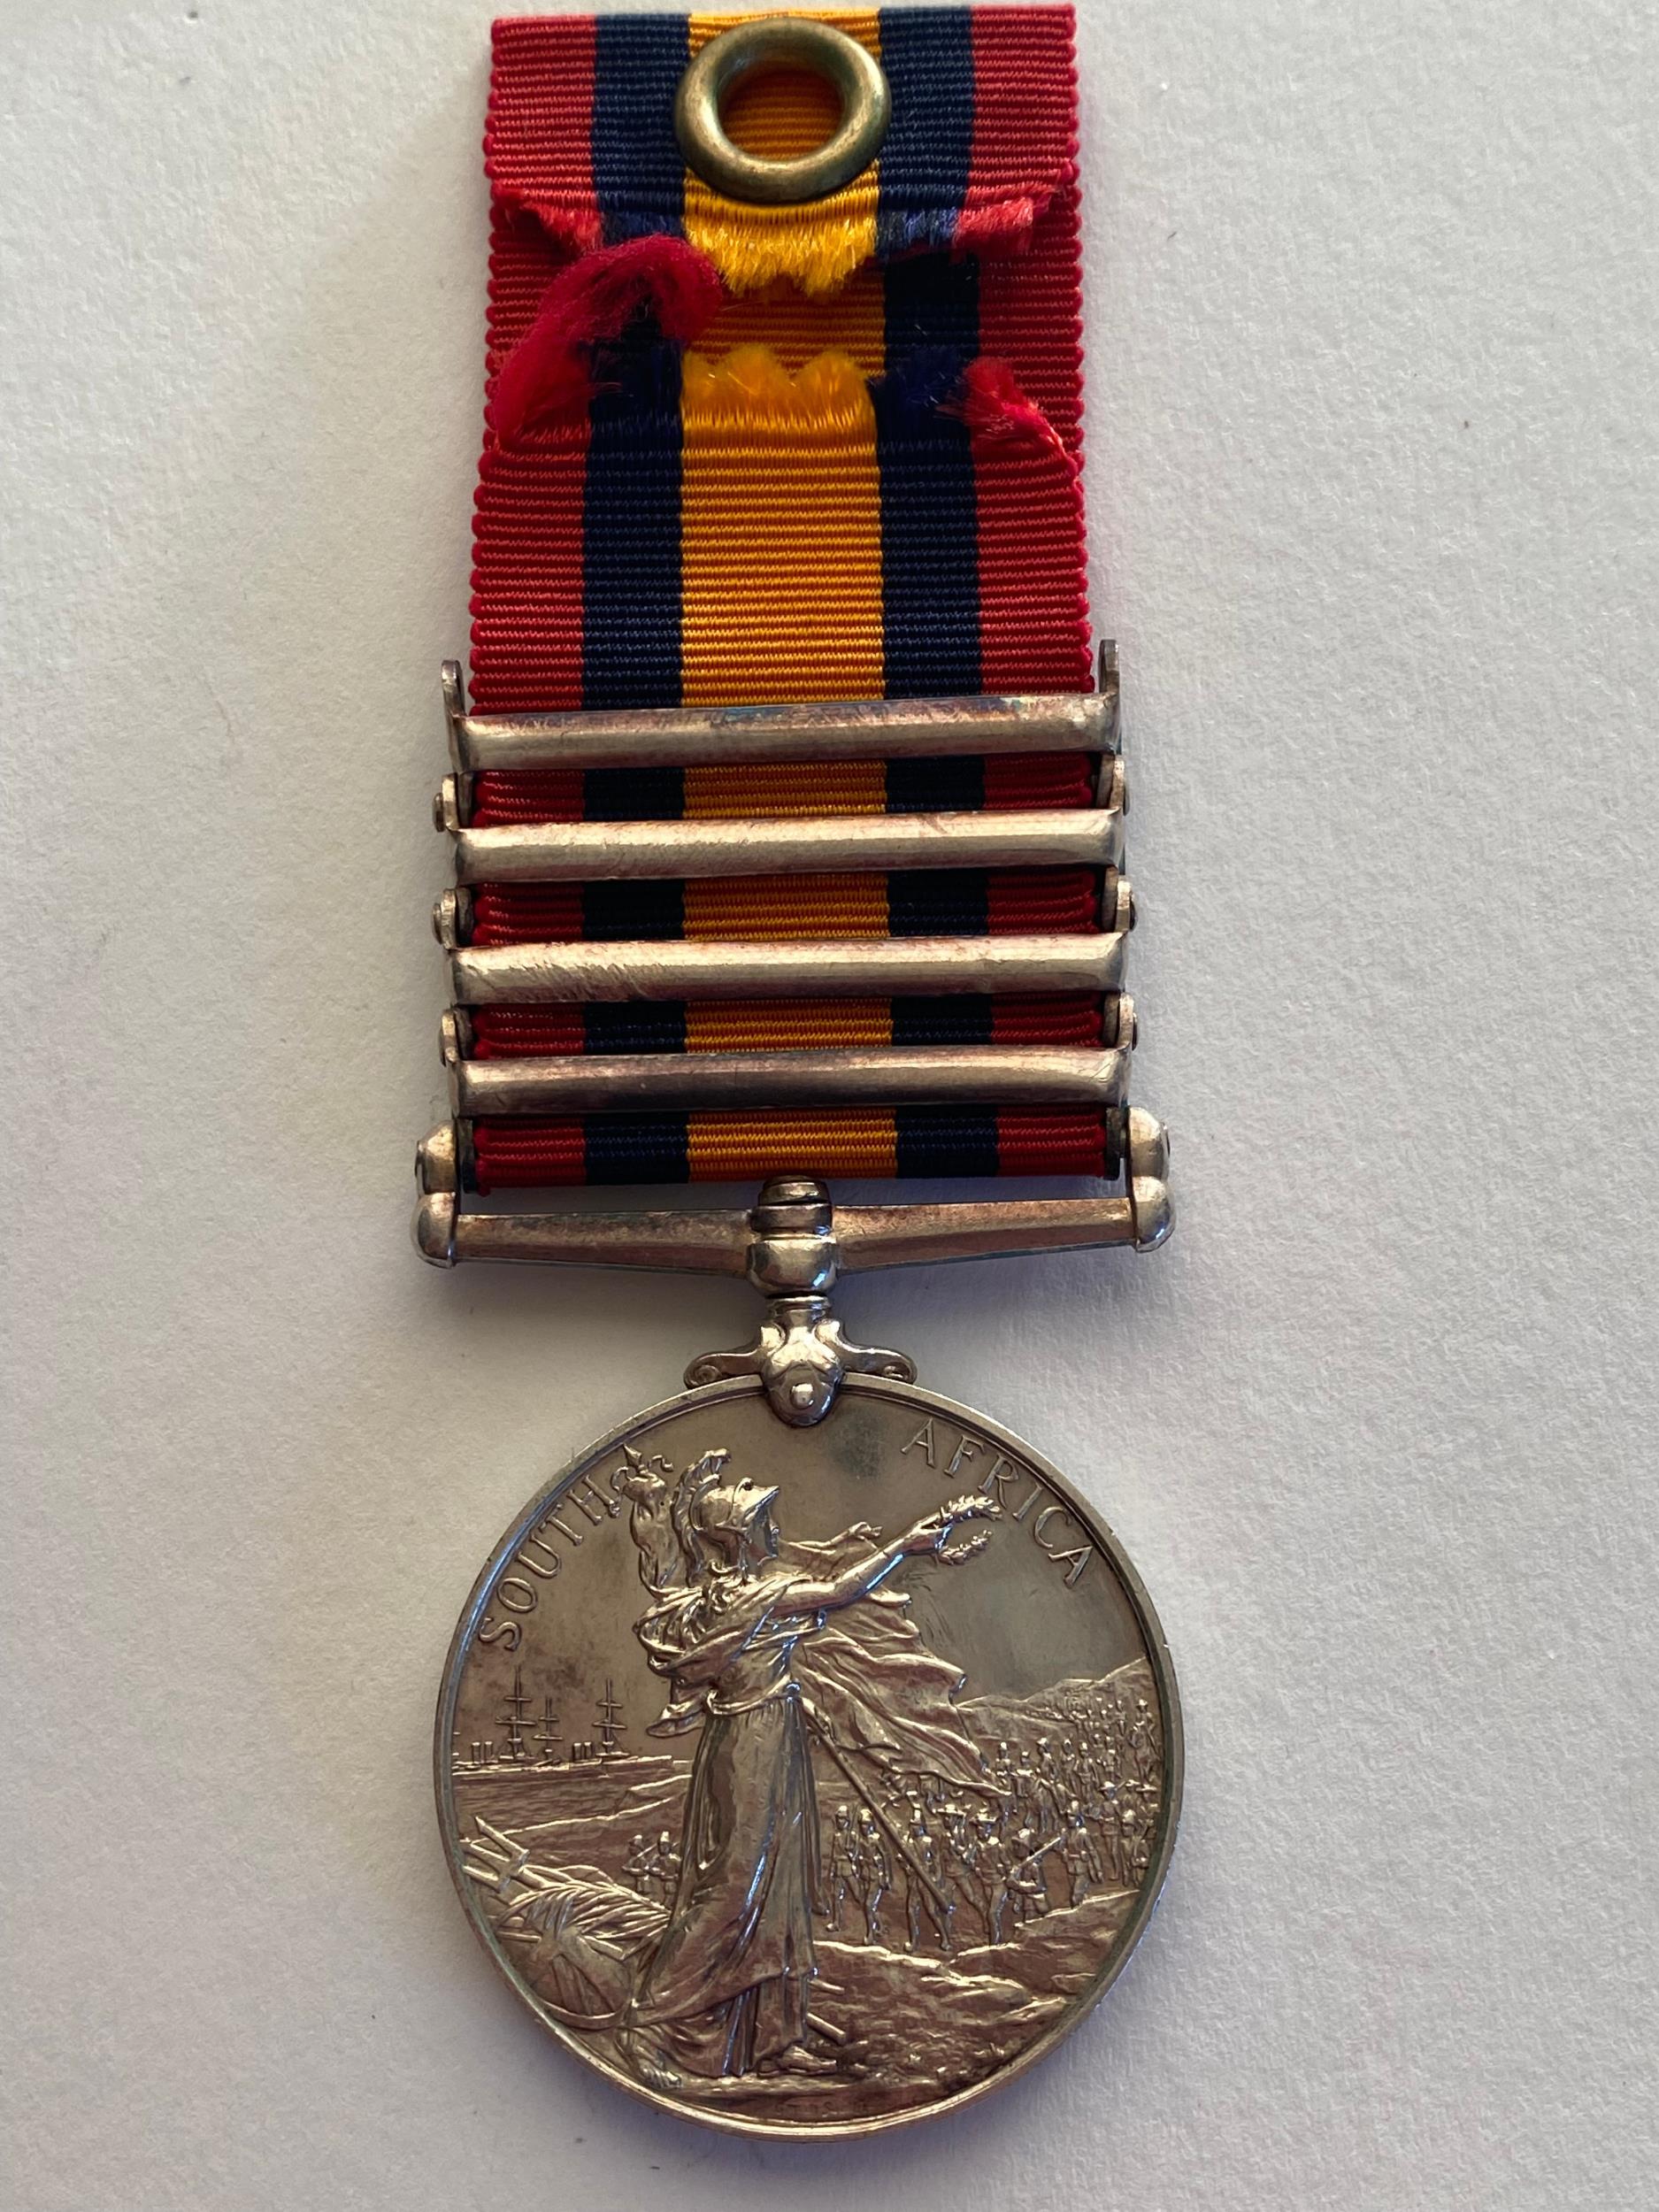 A FOUR CLASP QUEEN'S SOUTH AFRICA MEDAL TO A FIRST WORLD WAR CASUALTY AT JUTLAND. - Image 3 of 12